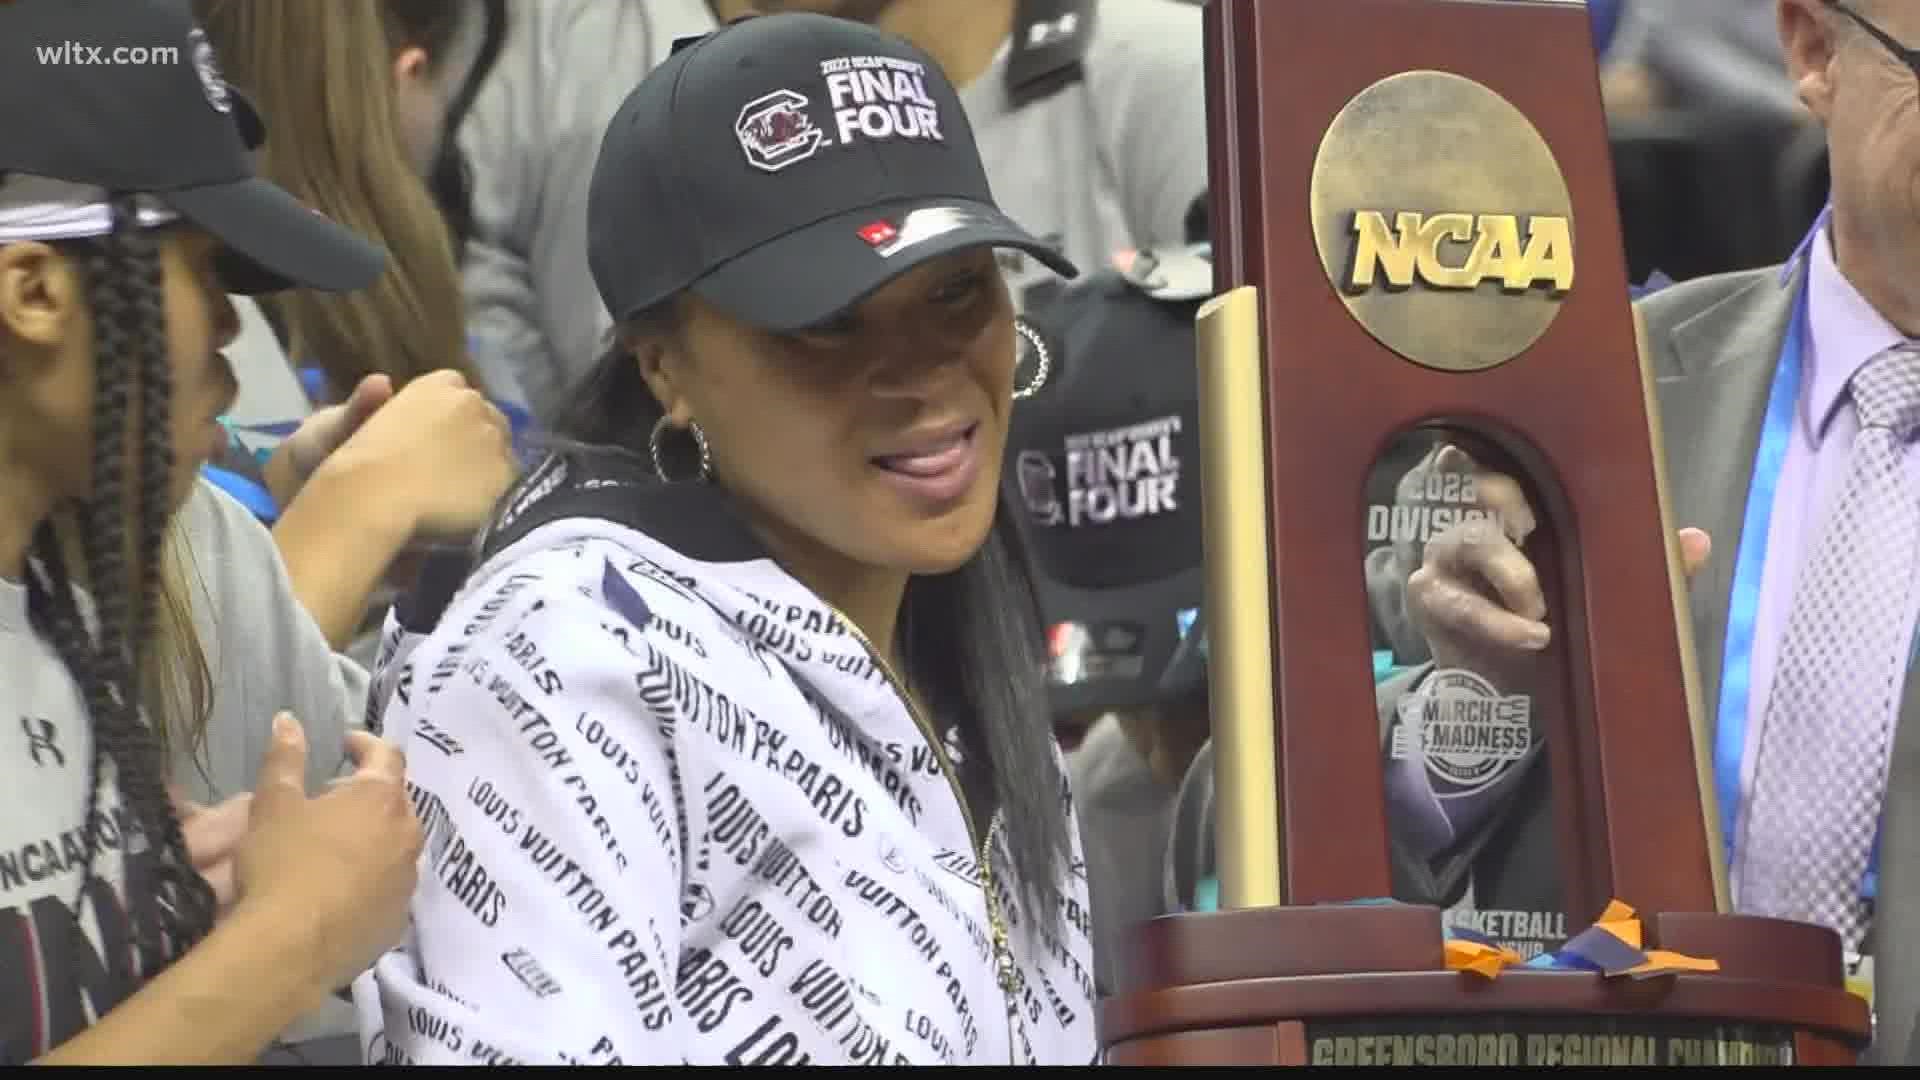 Dawn Staley inducted into Basketball Hall of Fame